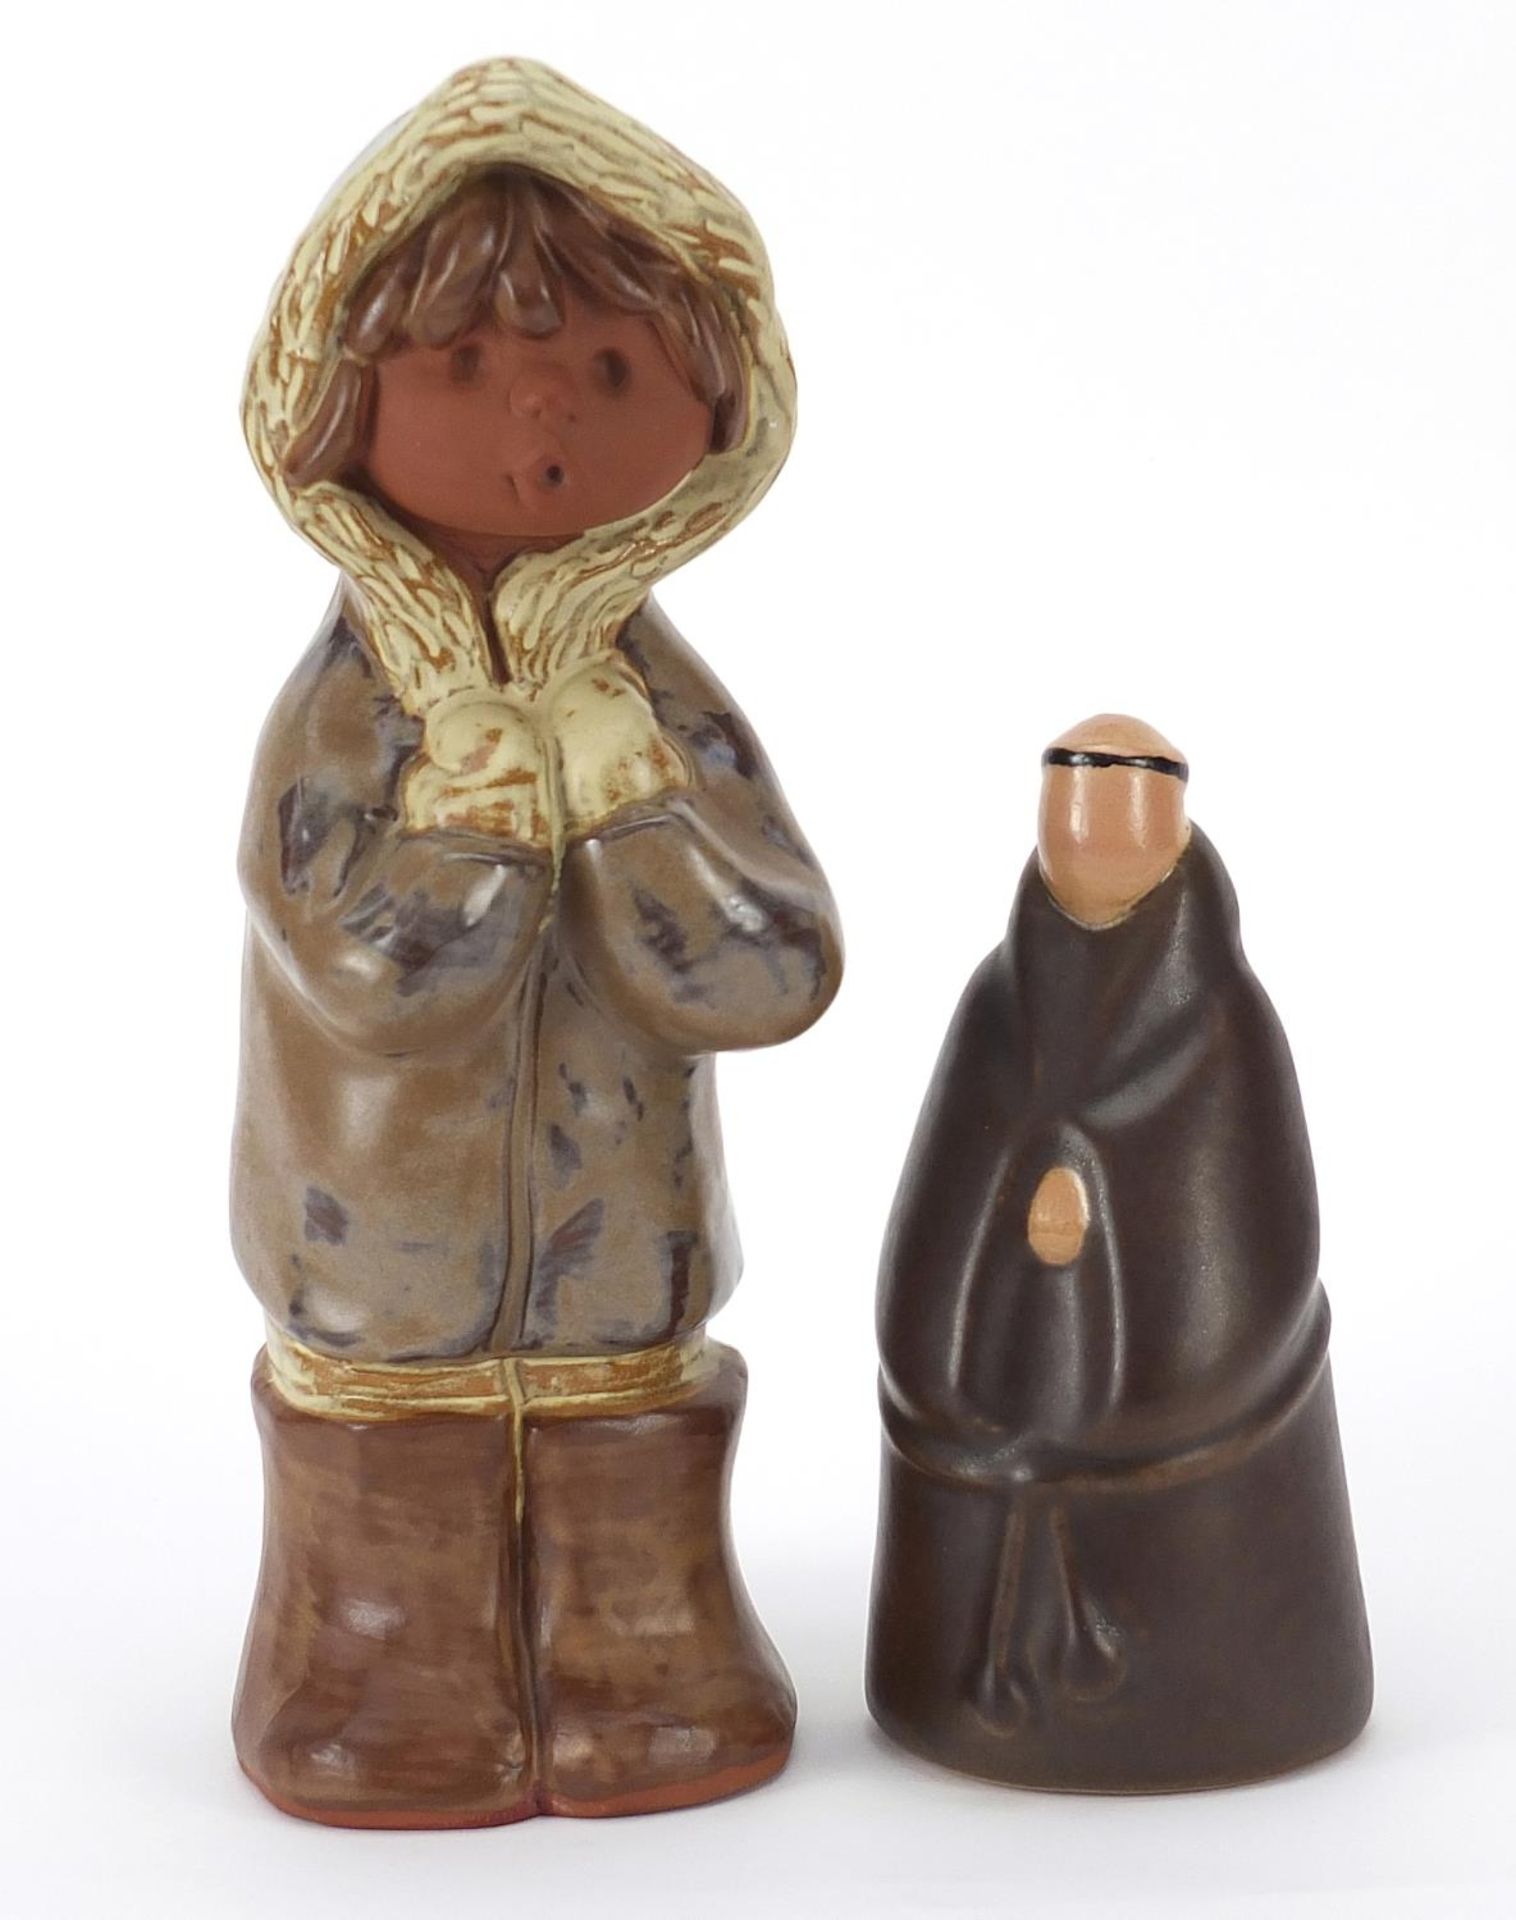 Scandinavian figure of a monk by Enkoping and one other, the largest 24.5cm high